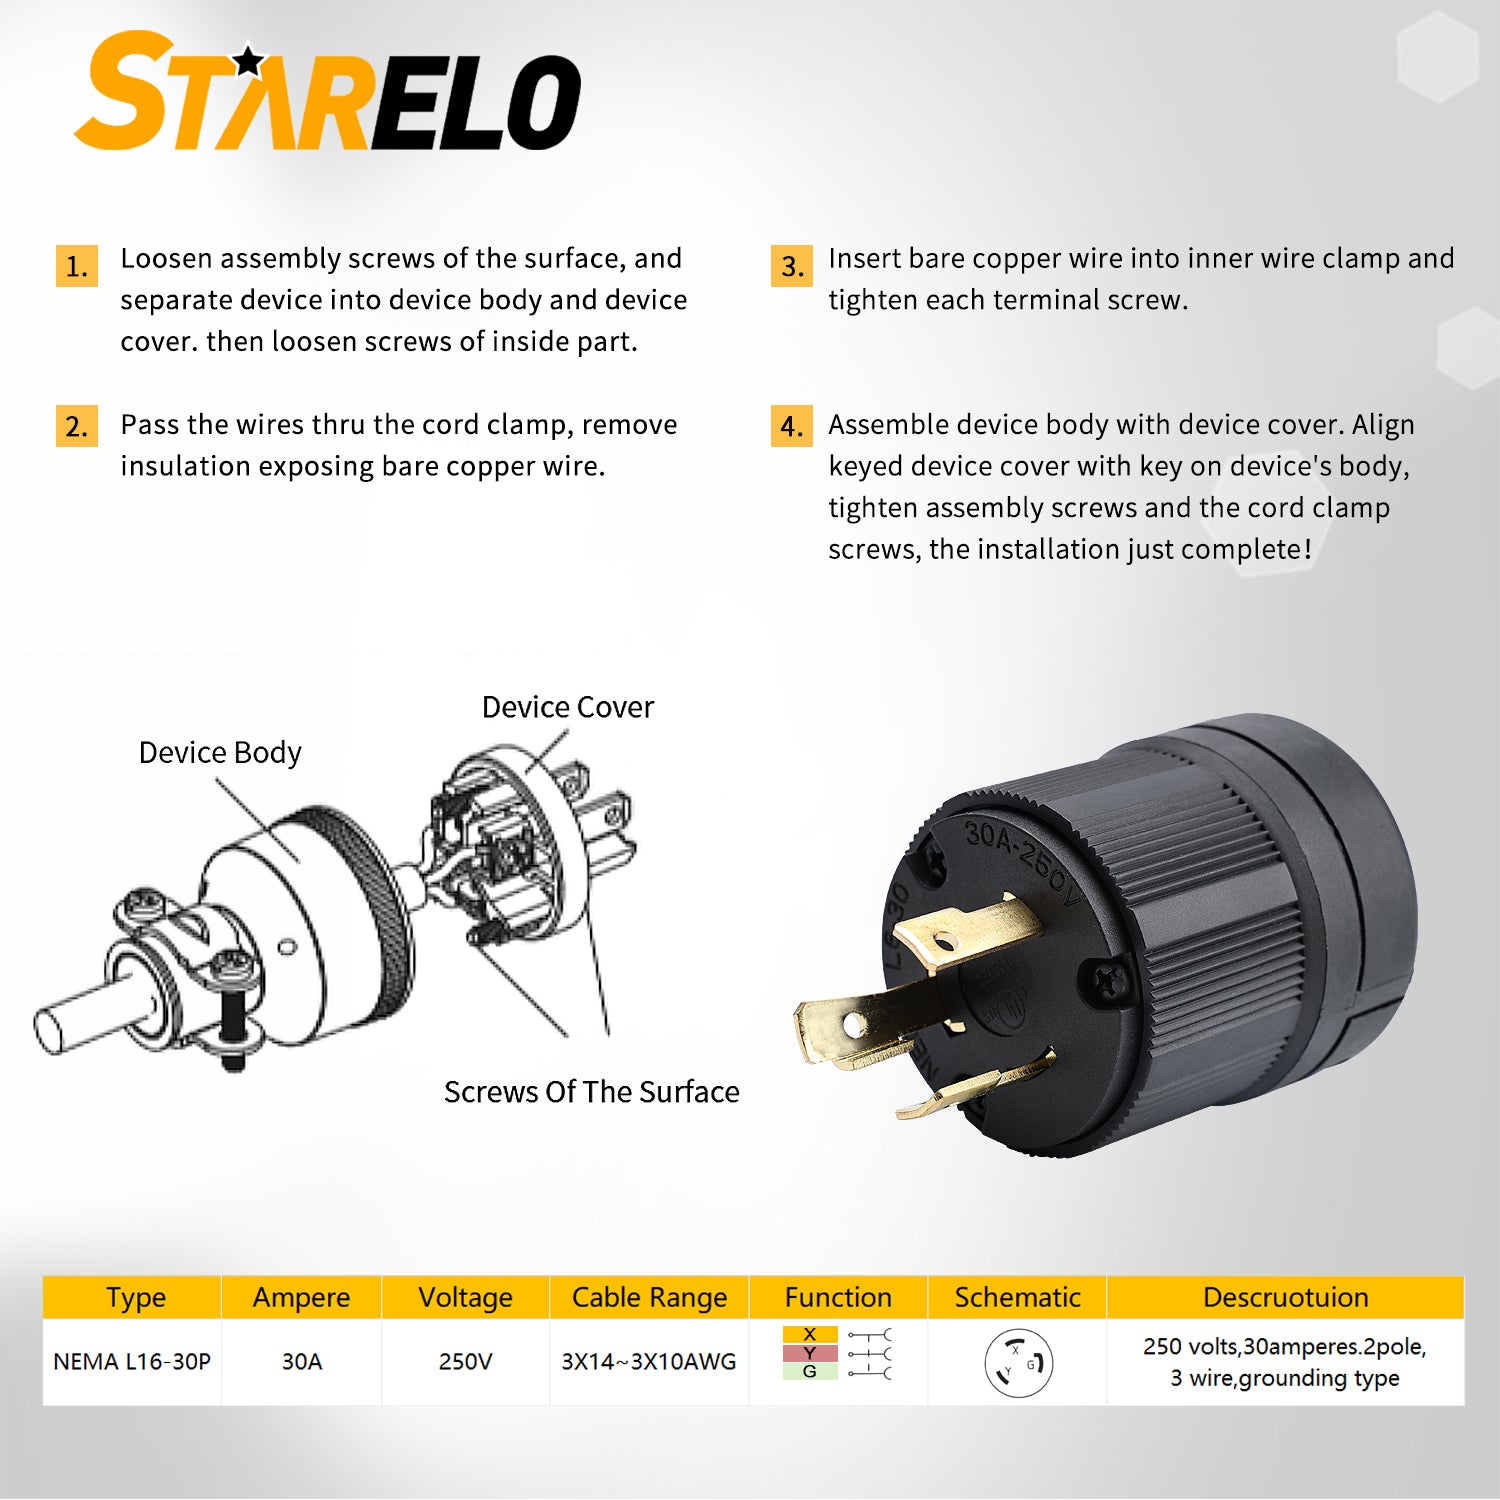 STARELO Locking Plug for Generator NEMA L6-30P Extension Cord End Male Plug 30A 250V 2 Pole 3 Wire Grounding Electrical Replacement Plug Industrial Grade UL Listed (NEMA L6-30P)